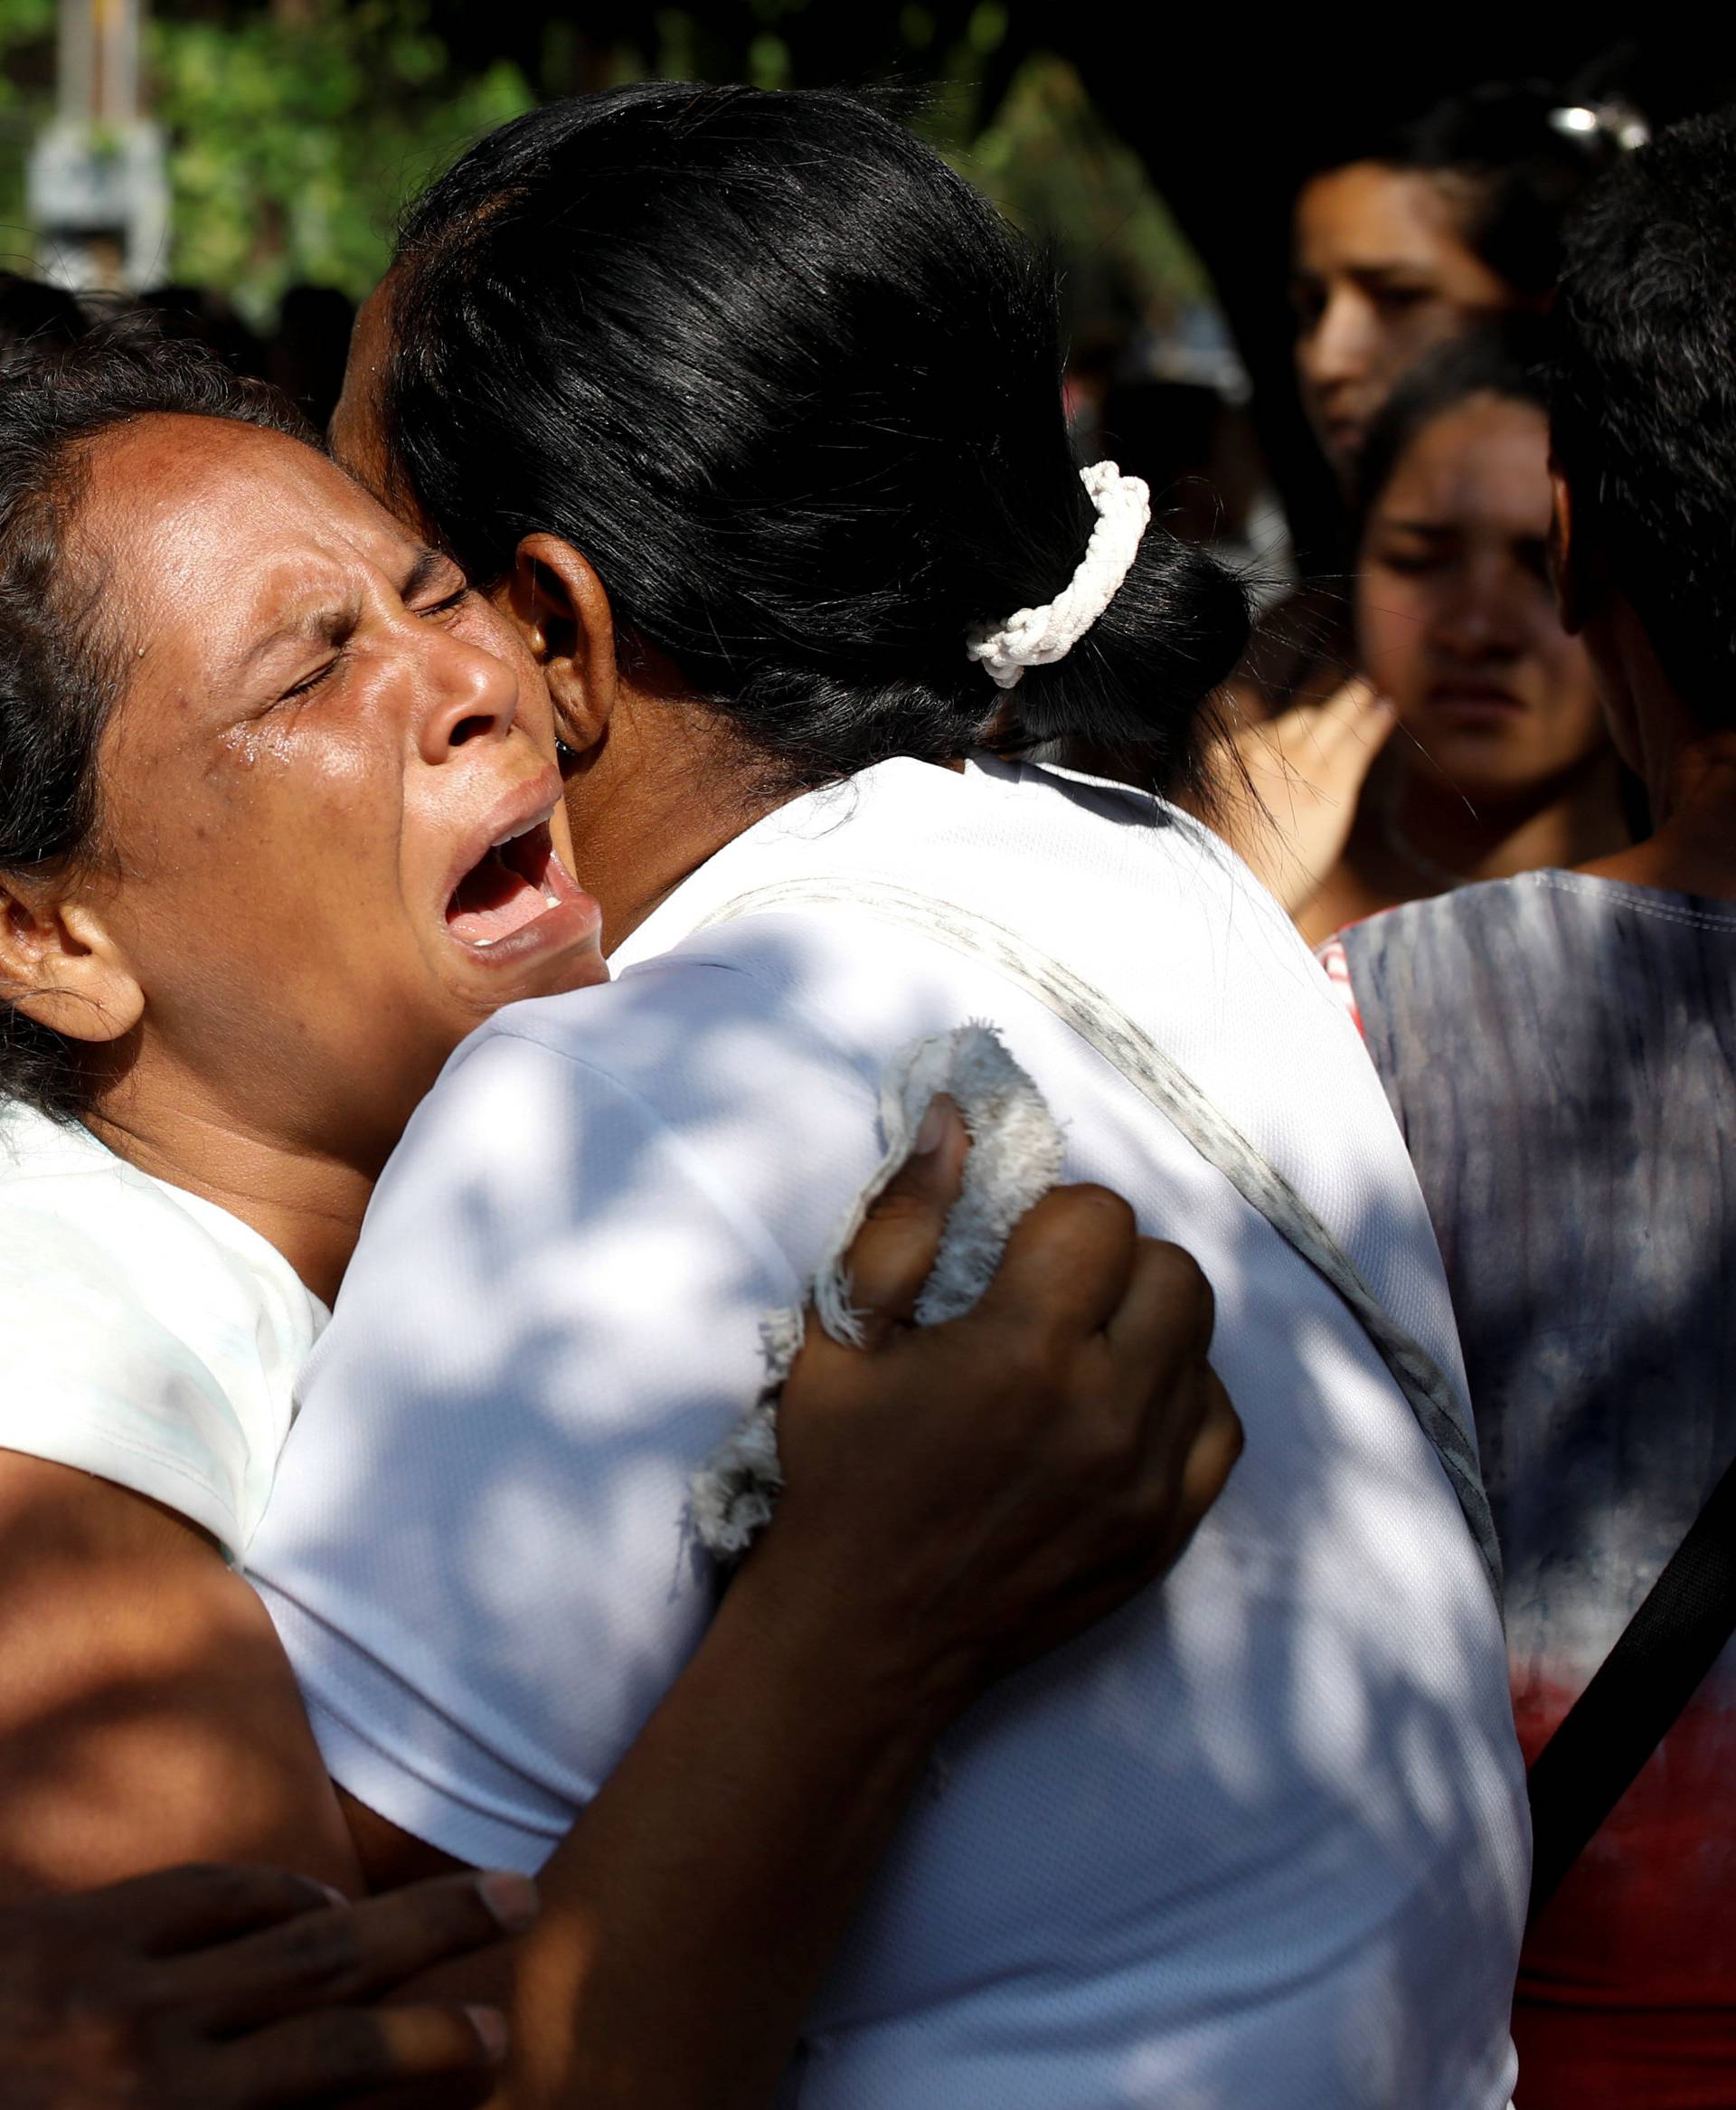 Relatives of inmates held at the General Command of the Carabobo Police react as they wait outside the prison, where a fire occurred in the cells area, according to local media, in Valencia